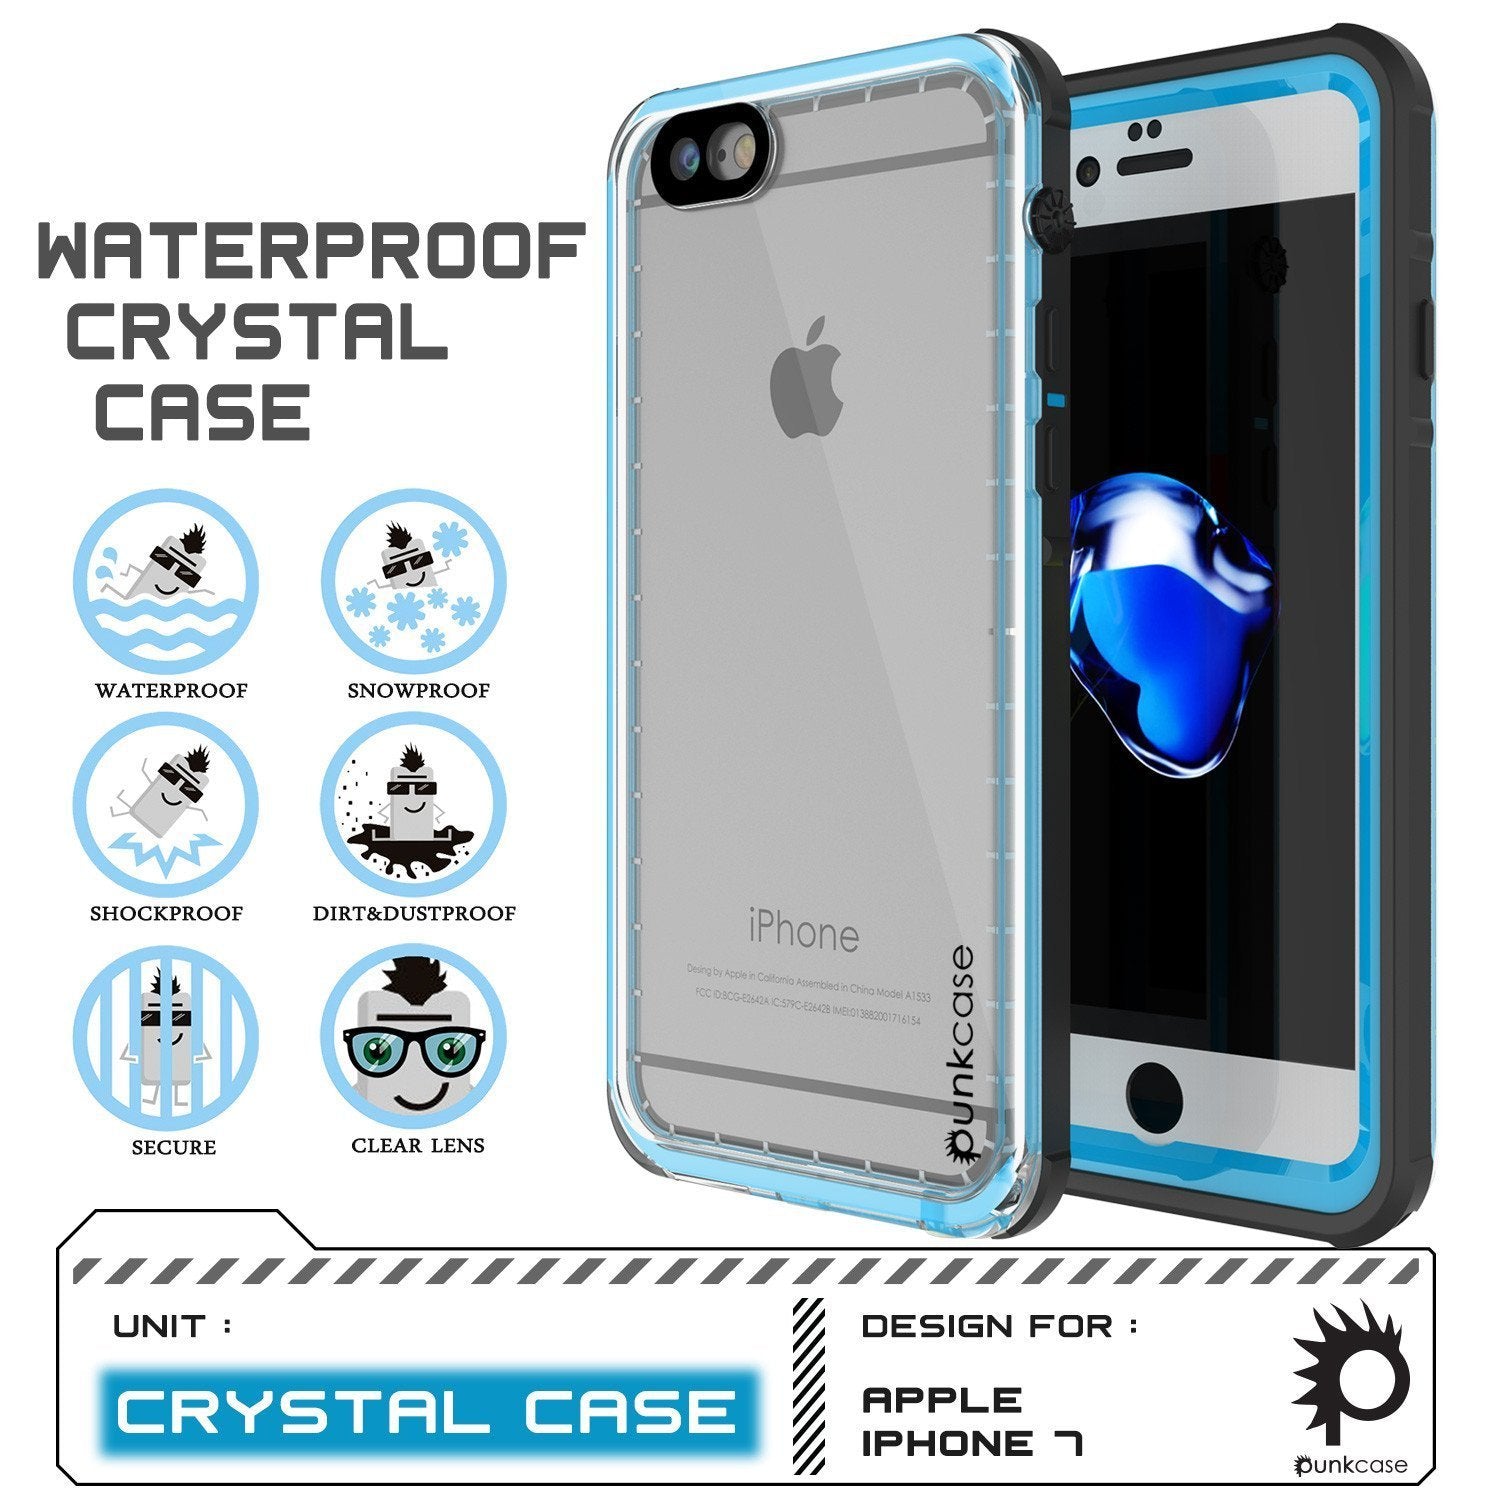 Apple iPhone SE (4.7") Waterproof Case, PUNKcase CRYSTAL Light Blue  W/ Attached Screen Protector  | Warranty